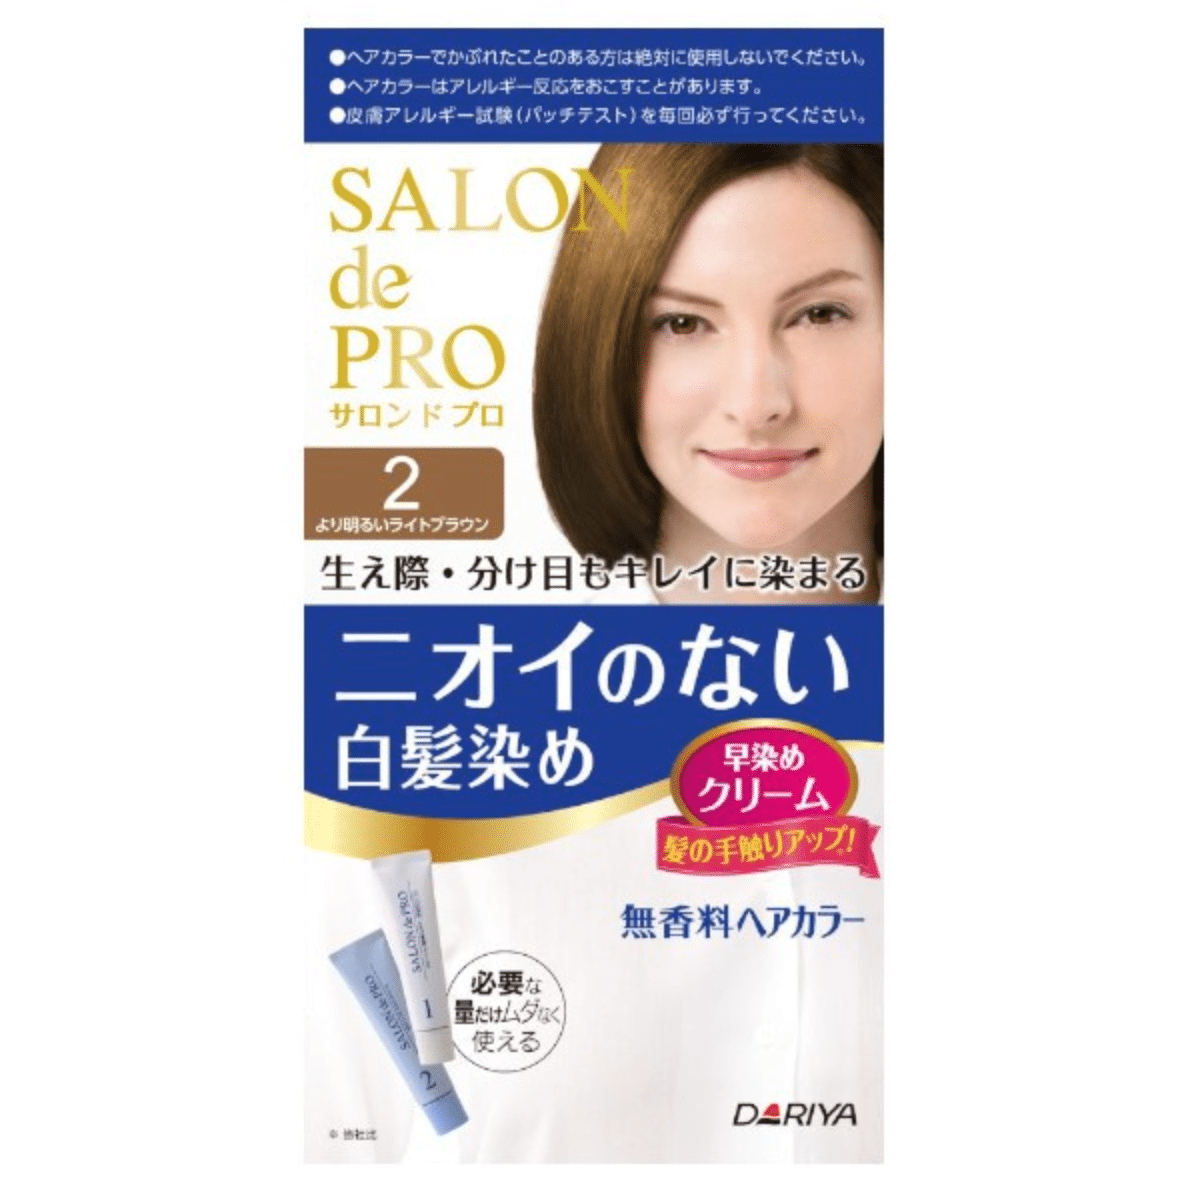 Best Asian hair dye products, by beauty blogger What The Fab